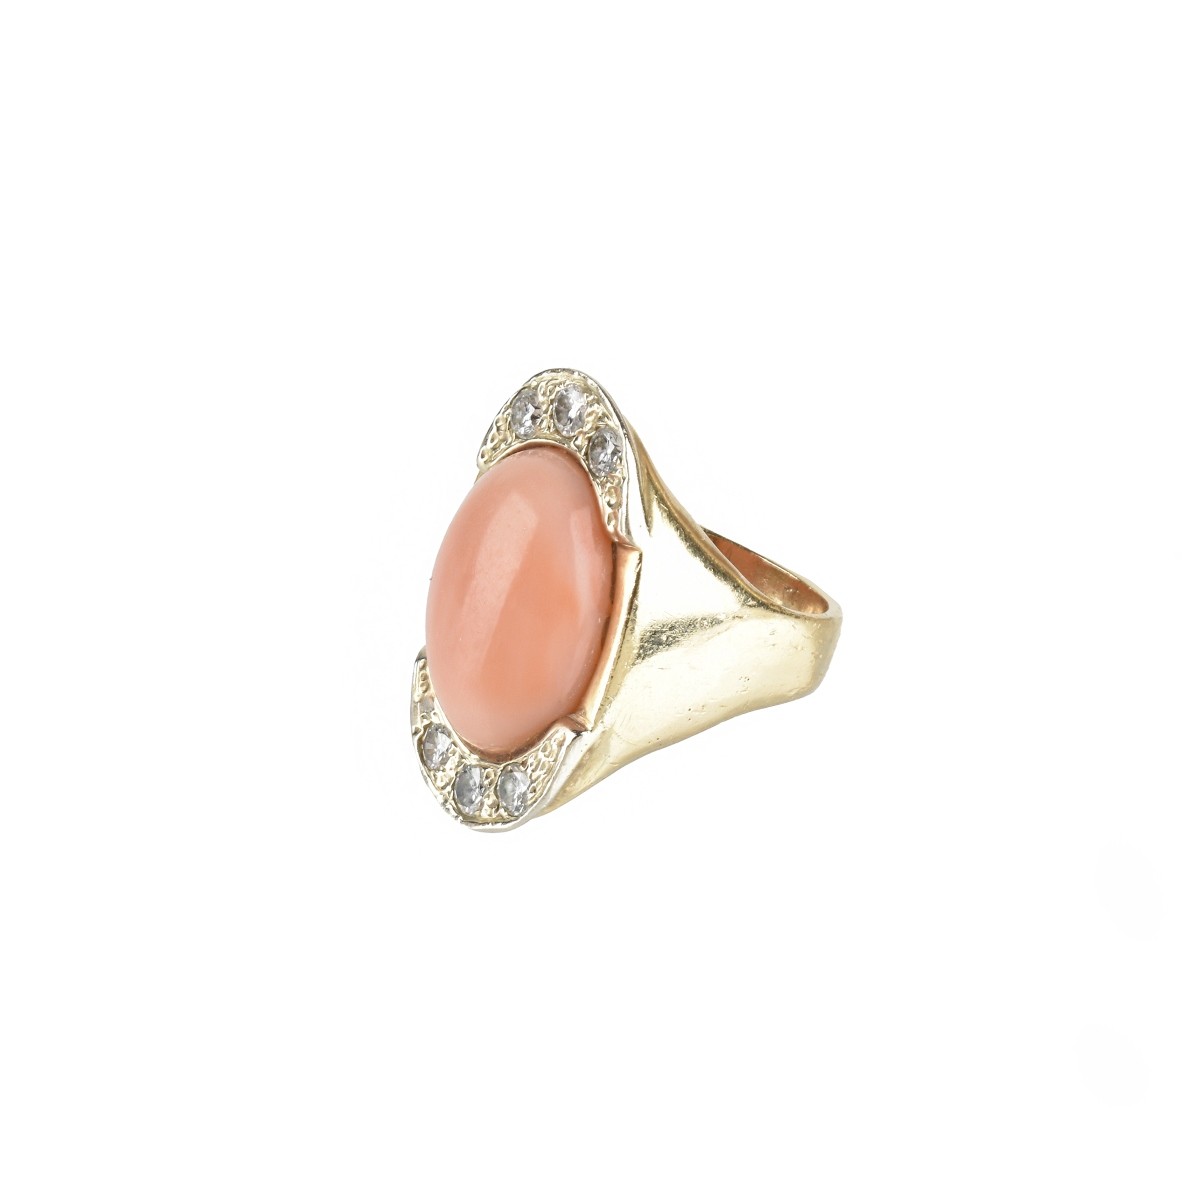 Diamond, Coral and 14K Ring